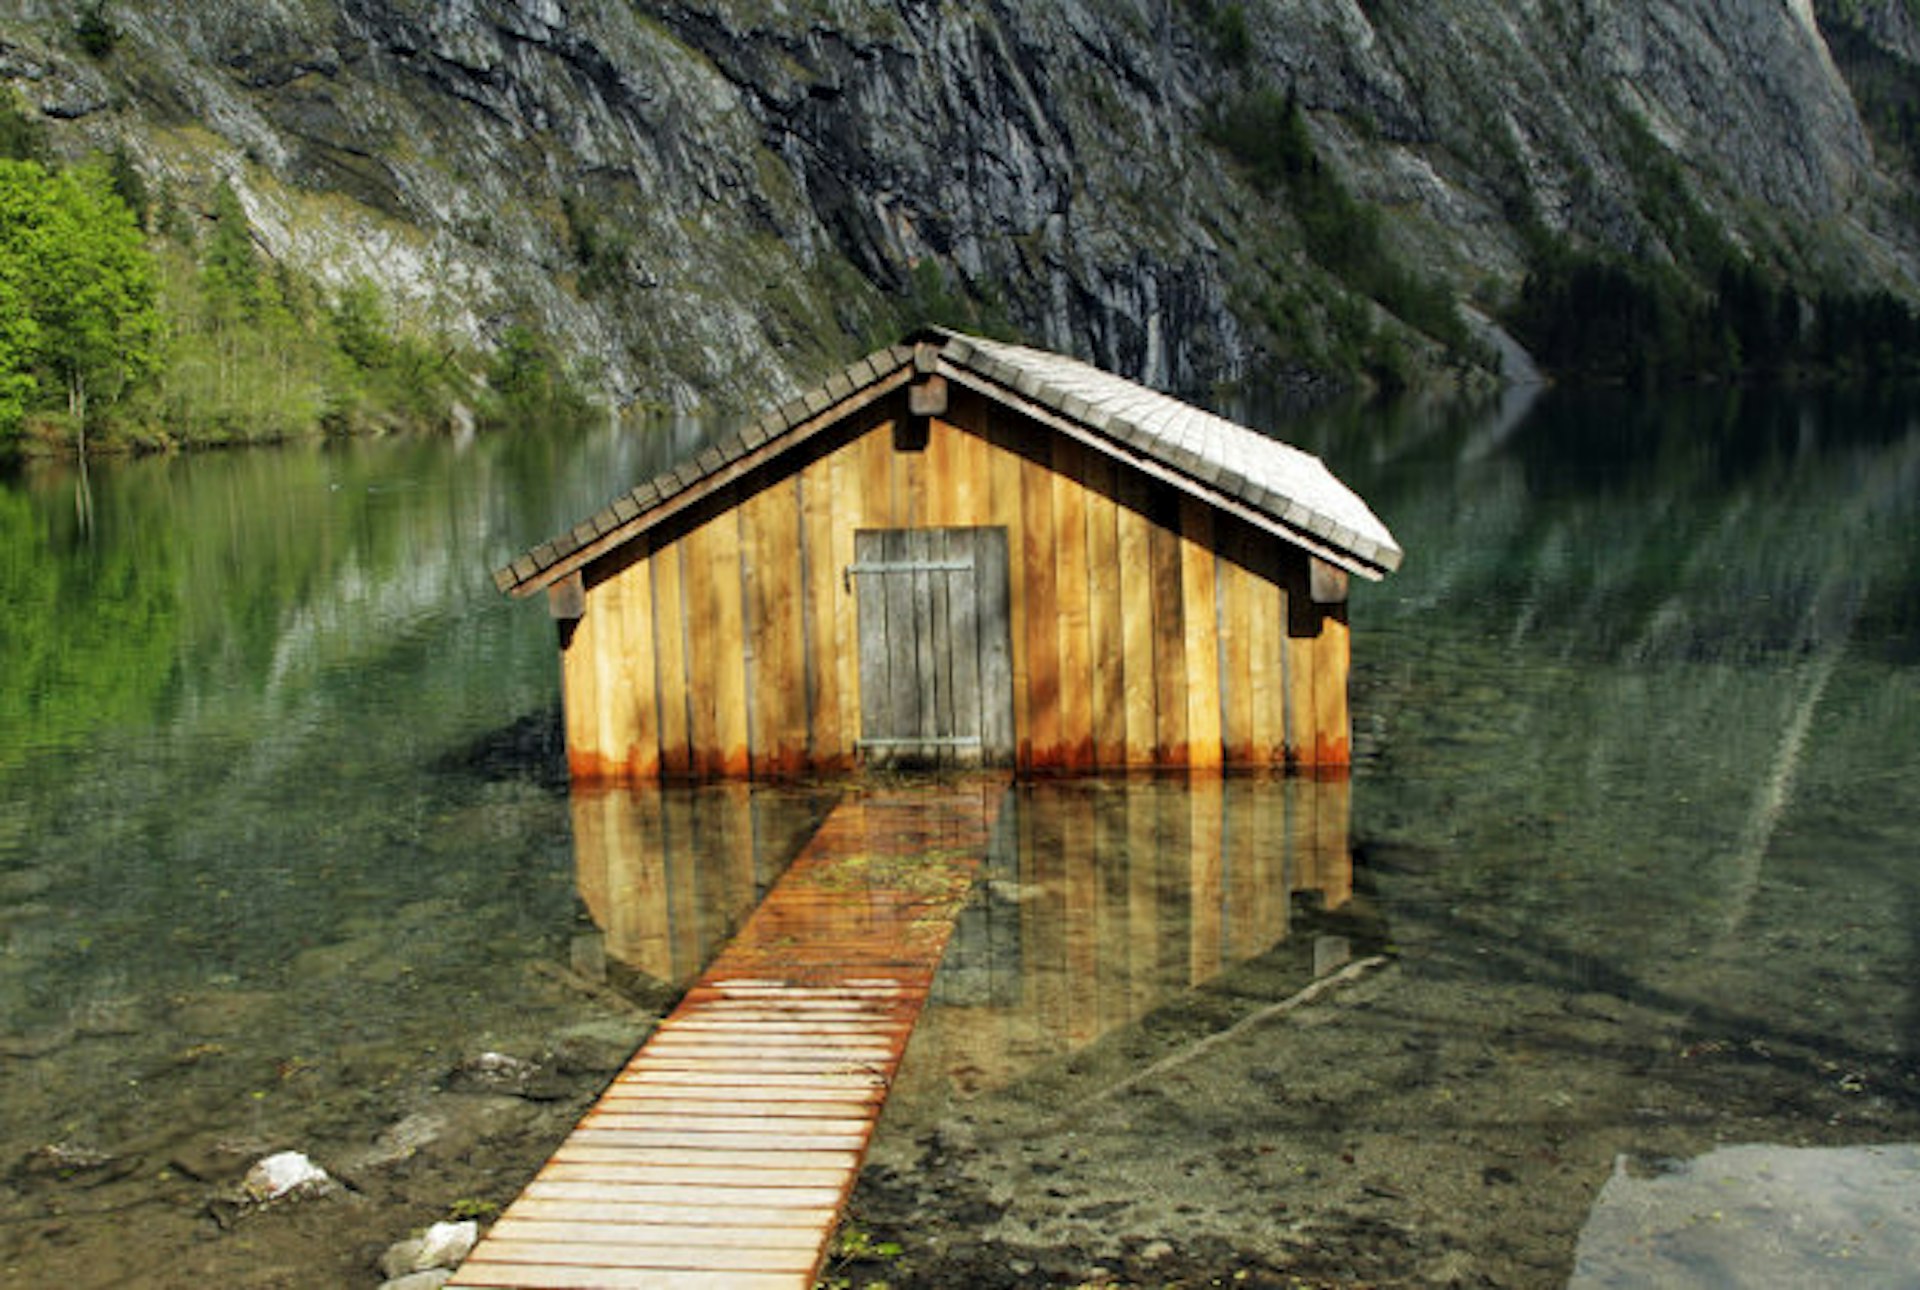 A boathouse on the Obersee, a lake in Bavaria, Germany